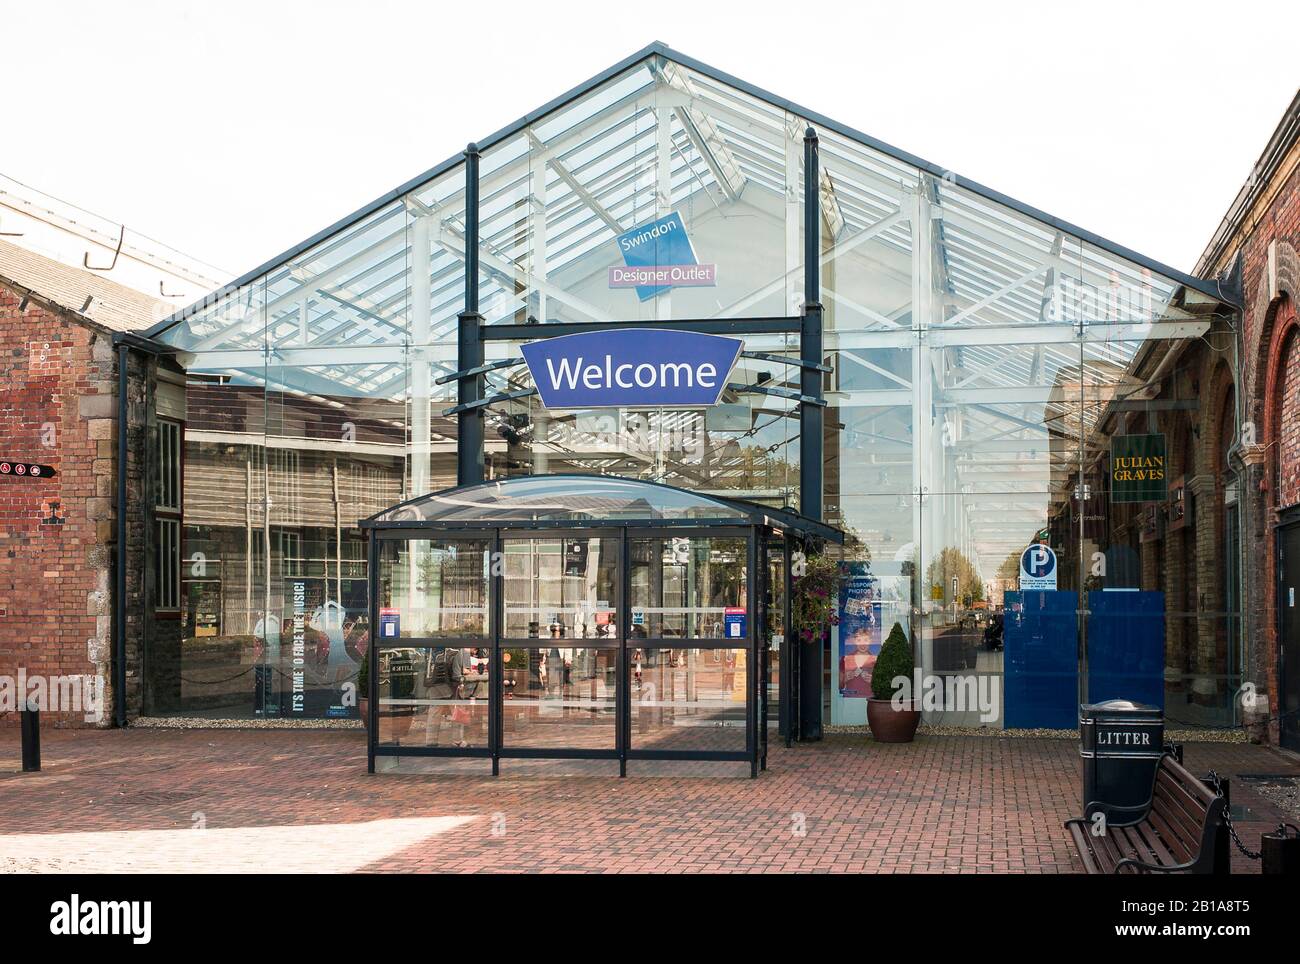 Entrance to the Swindon Designer Outlet shopping centre in Wiltshire England UK, site of former large GWR railway engineering works. Stock Photo